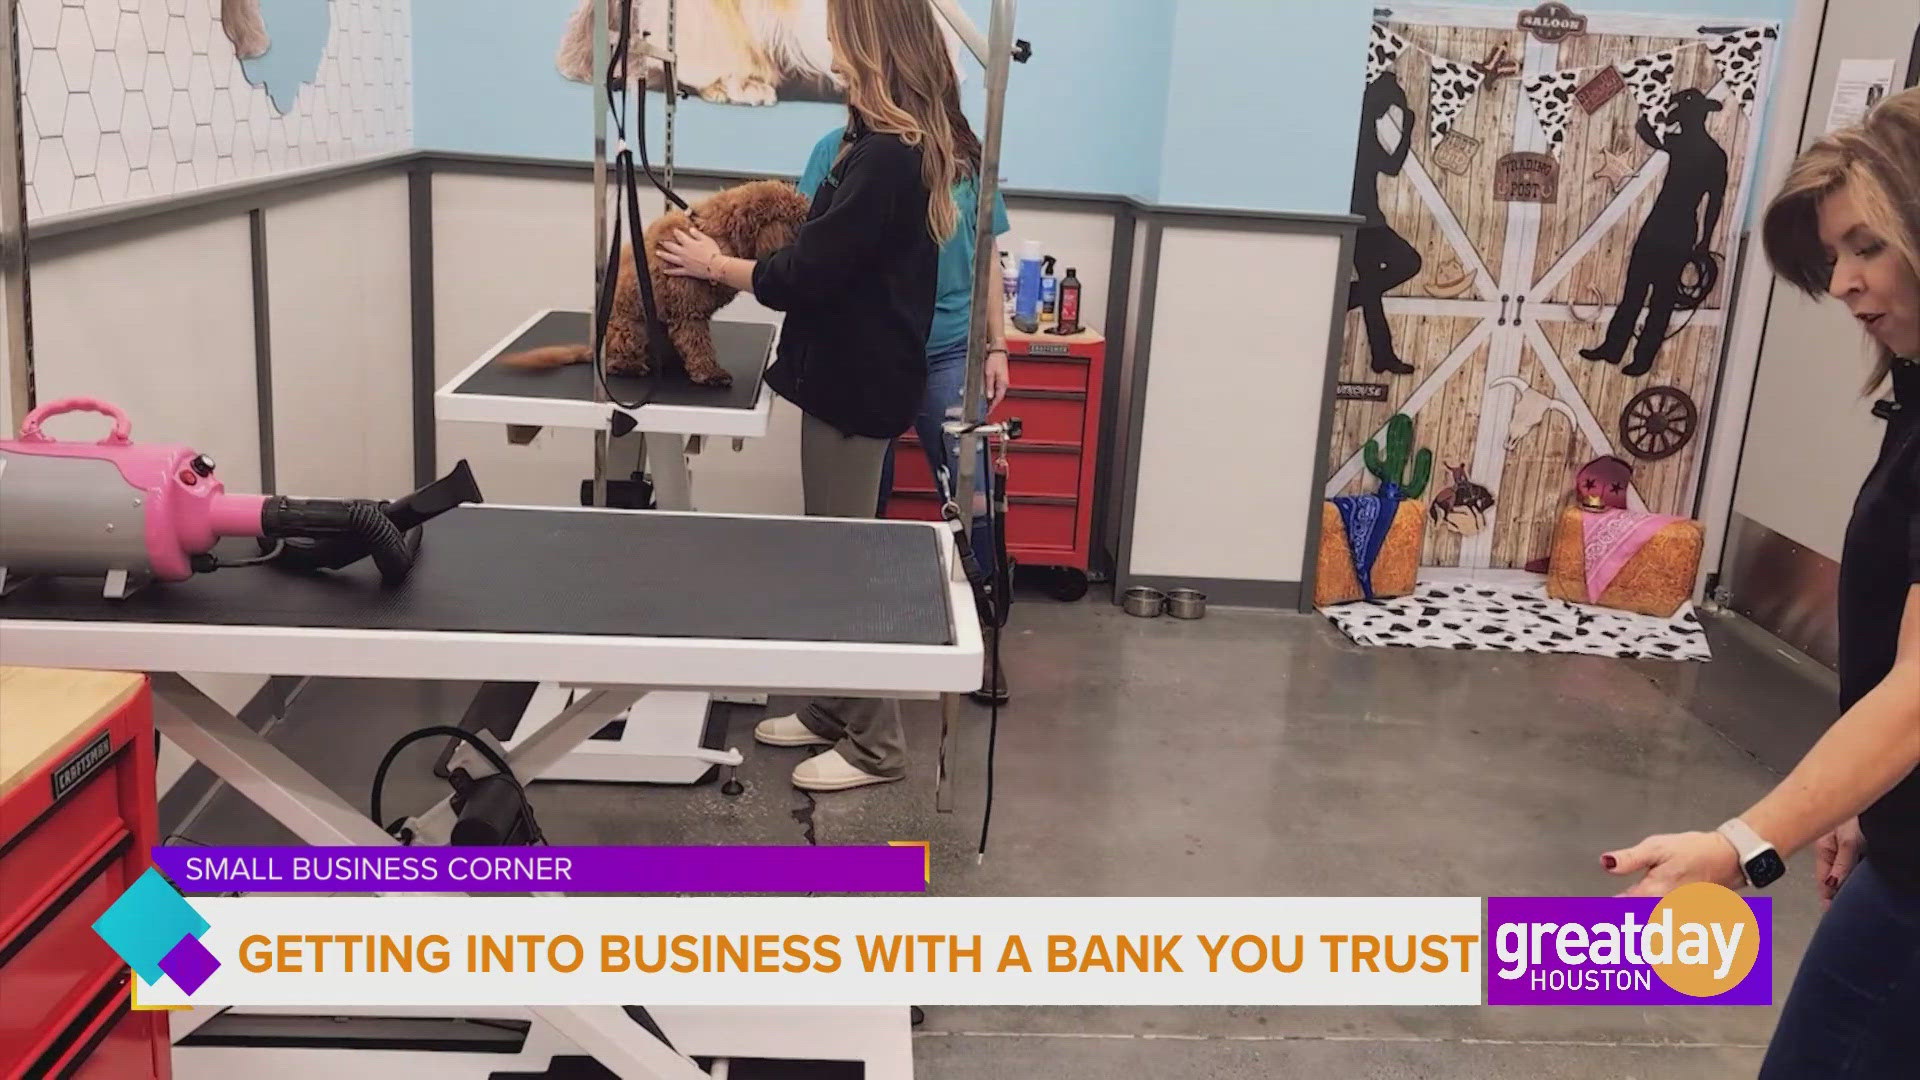 Owners and mother / daughter duo of Pet Supplies Plus share how their company become the cats meow after teaming up with Veritex Community bank